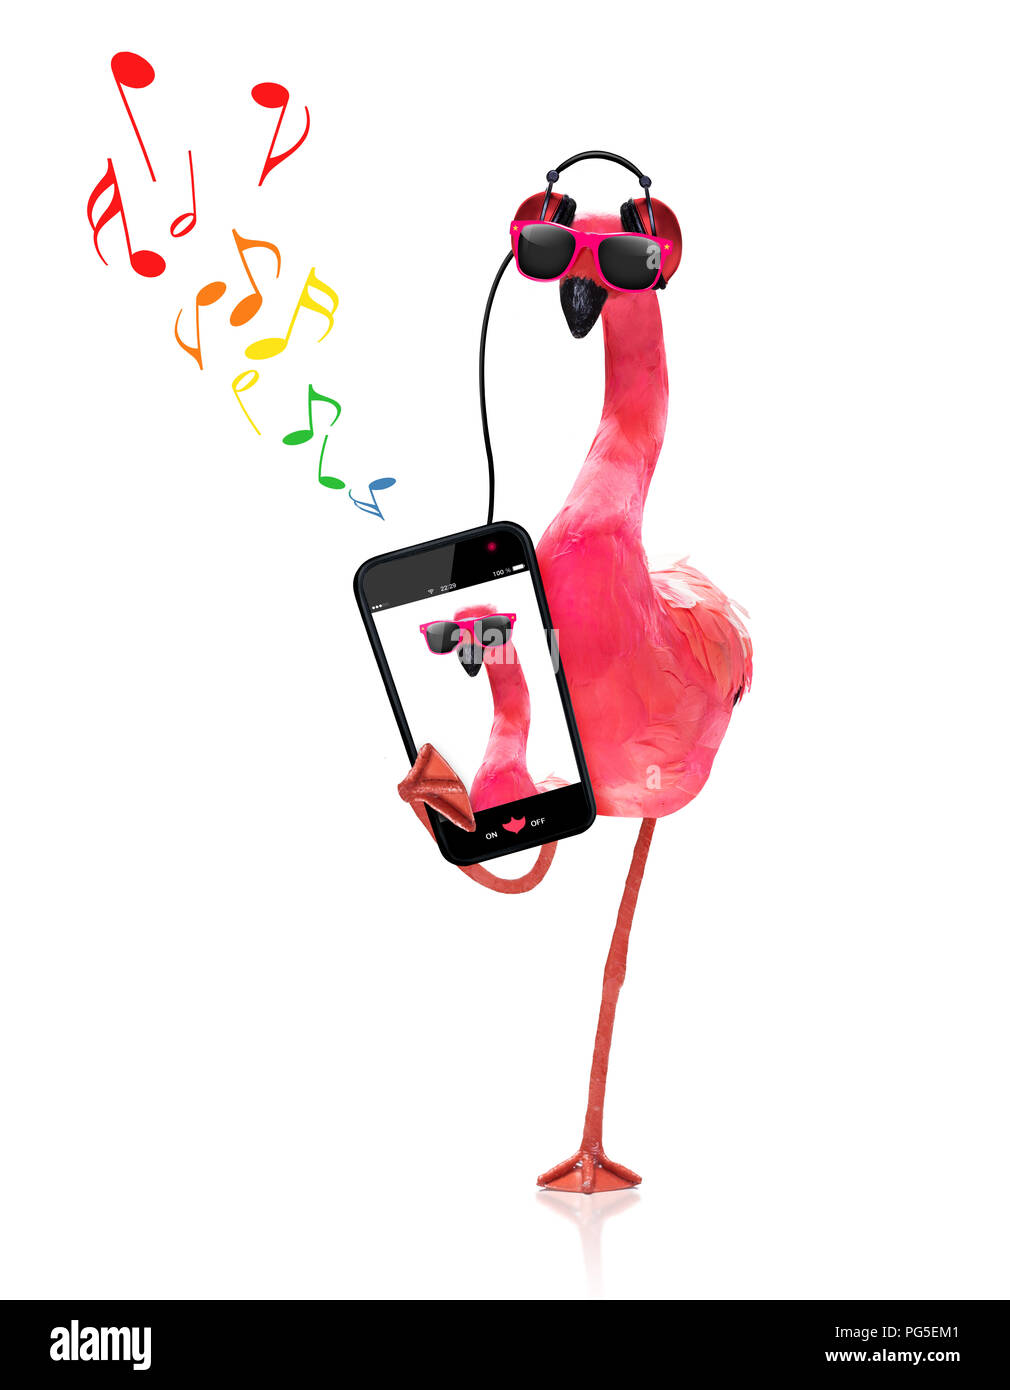 cool dj pink gay flamingo listening or singing to music with headphones and  mp3 player, isolated on white background Stock Photo - Alamy